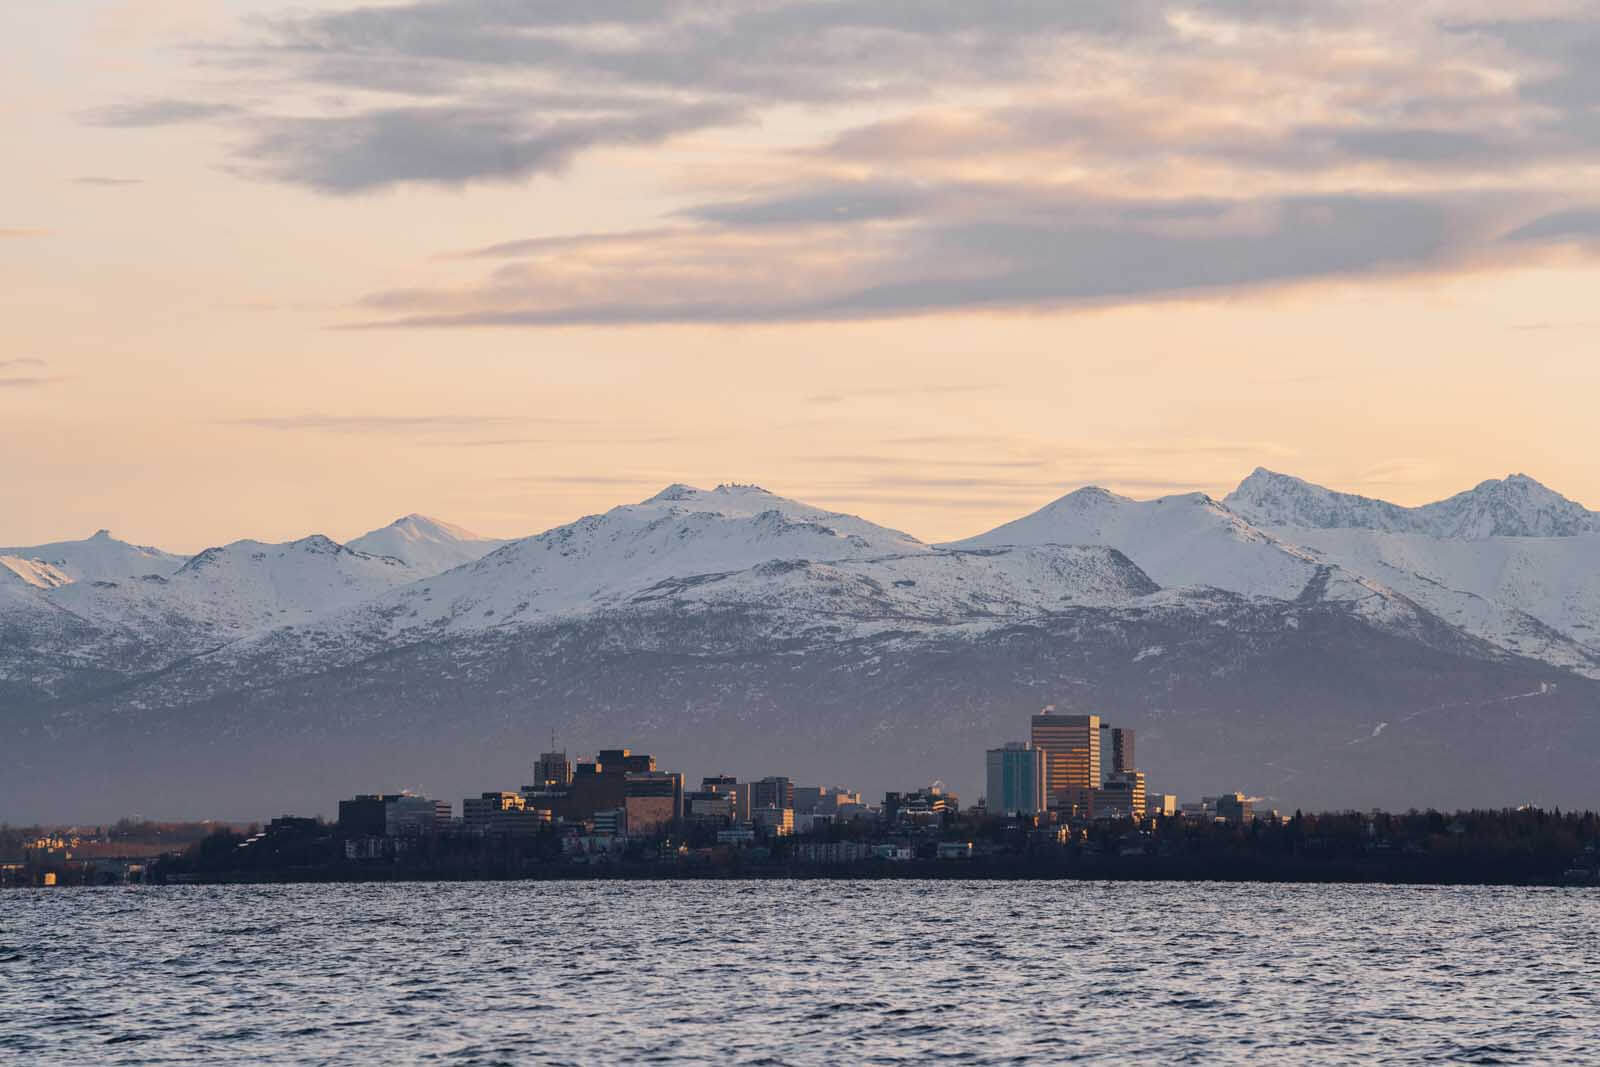 View of Anchorage from the Tony Knowles Coastal trail in Alaska